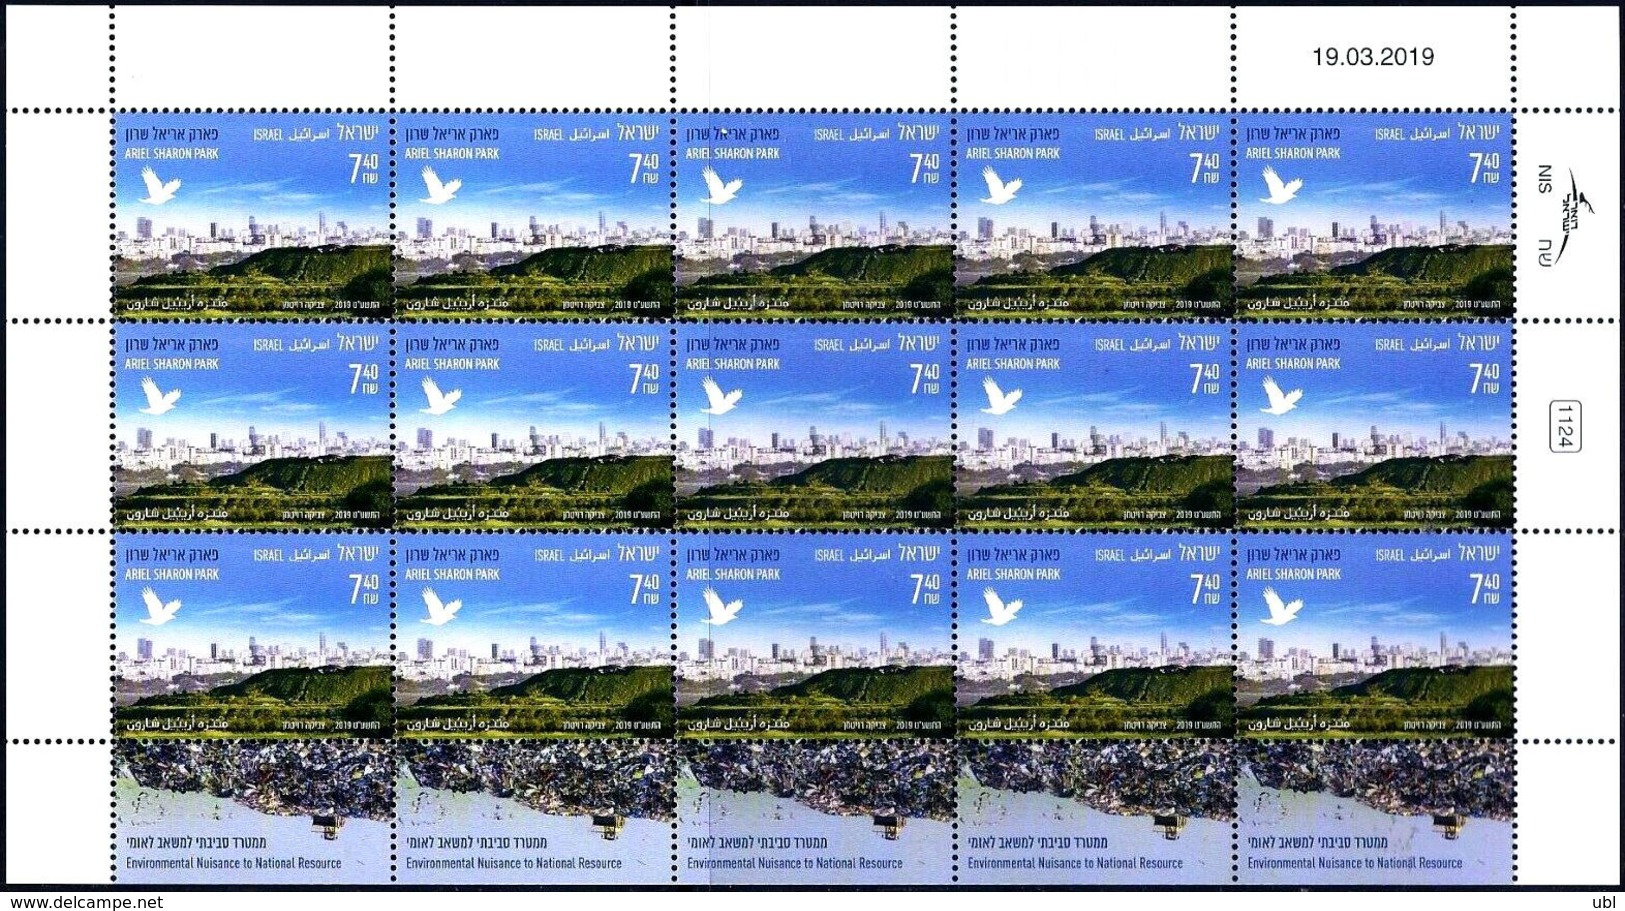 ISRAEL 2019 - The Ariel Sharon Park - Environmental Rehabilitaion - A Sheet Of 15 Stamps - MNH - Environment & Climate Protection